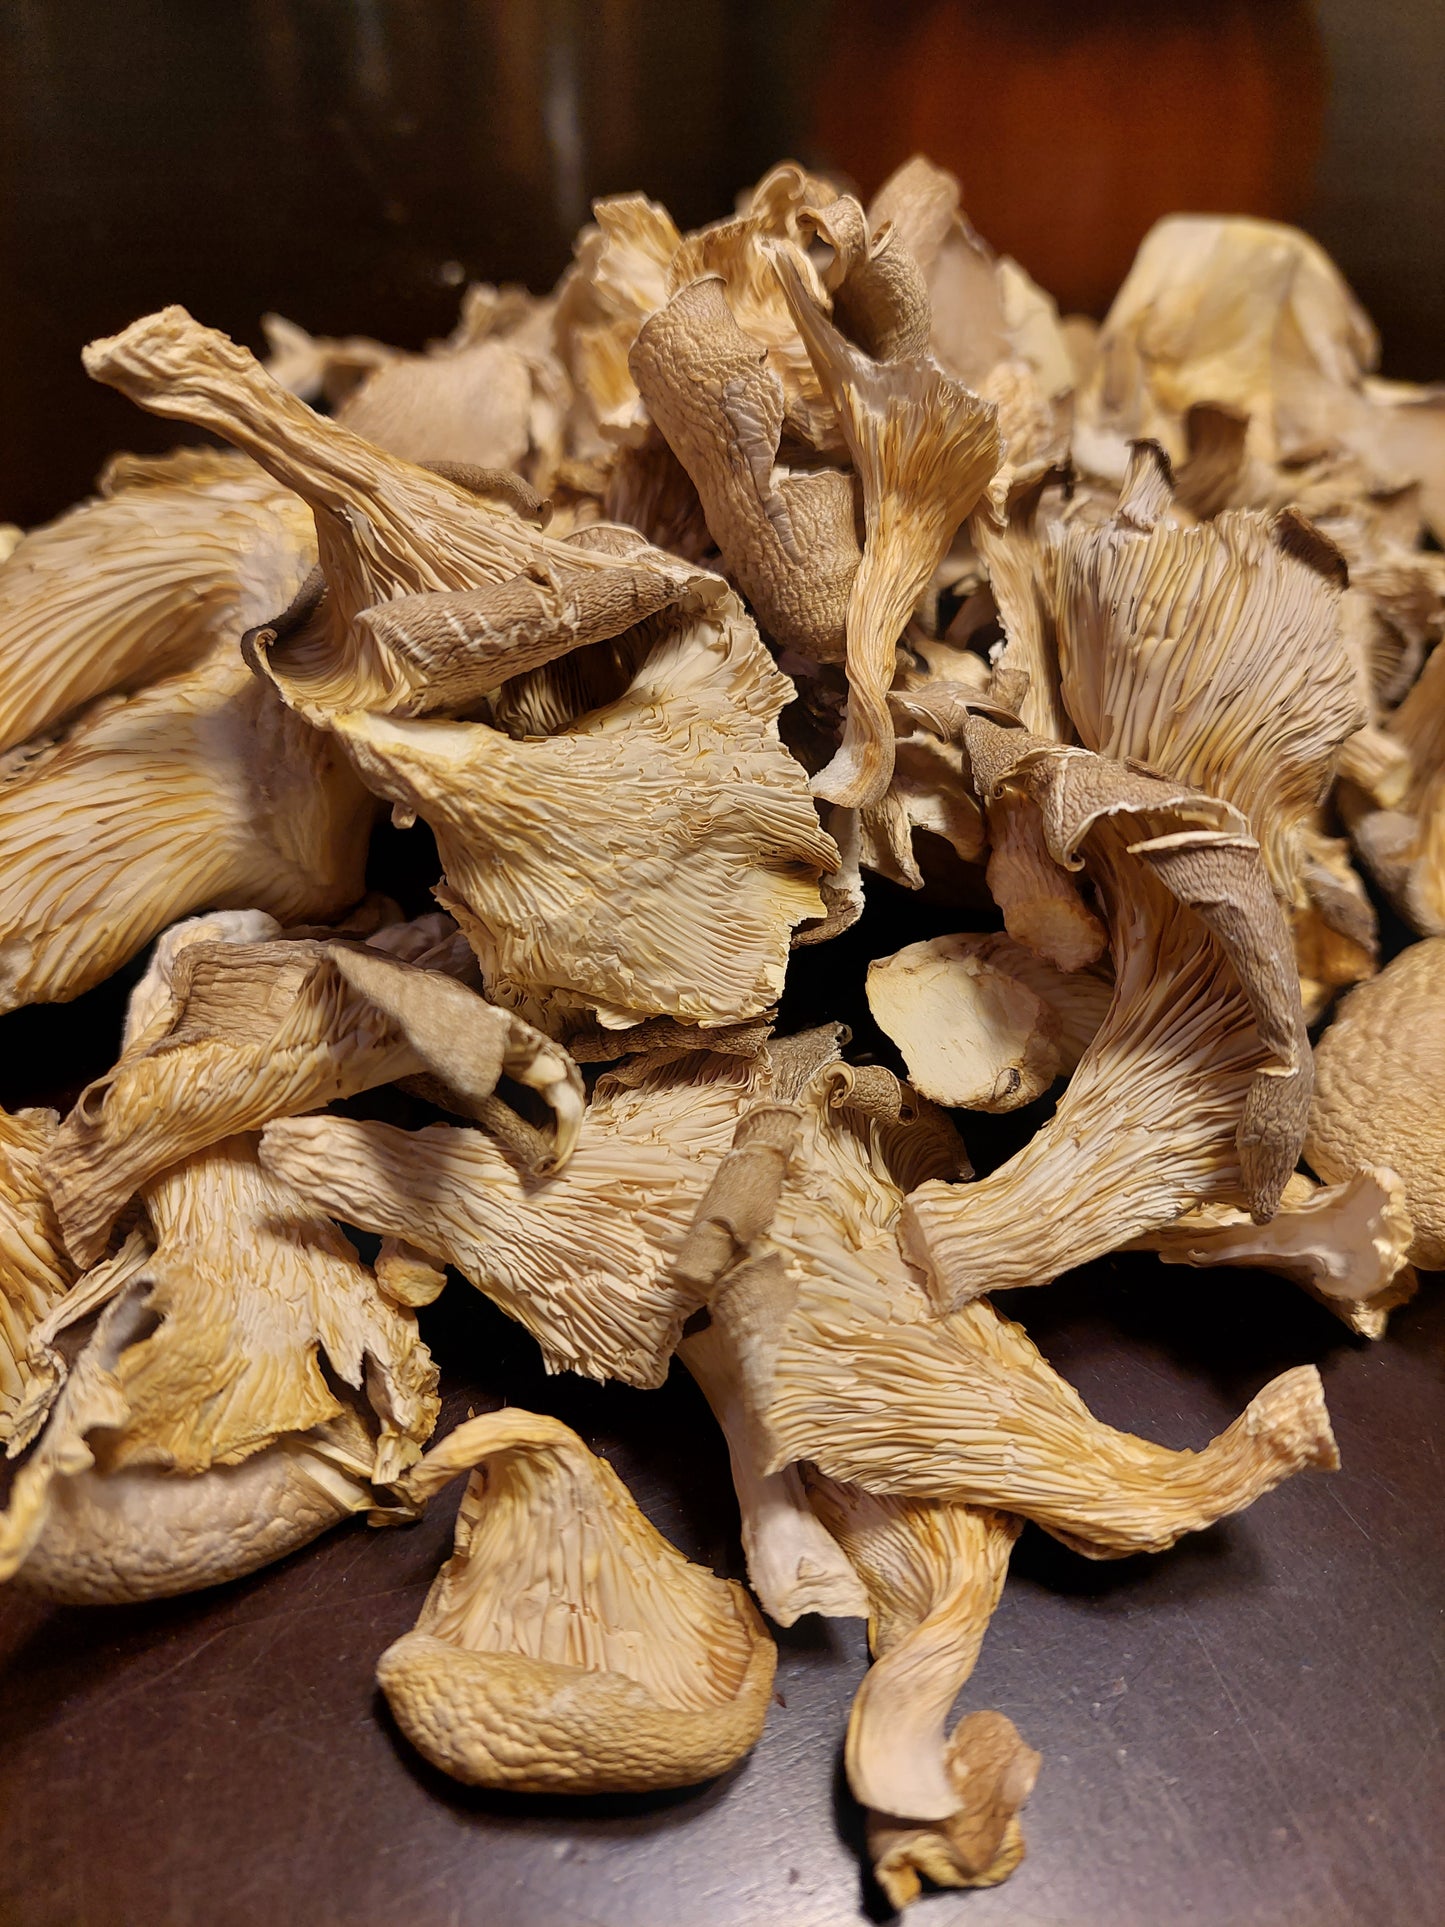 Dried Oyster Mushrooms (Mixed)